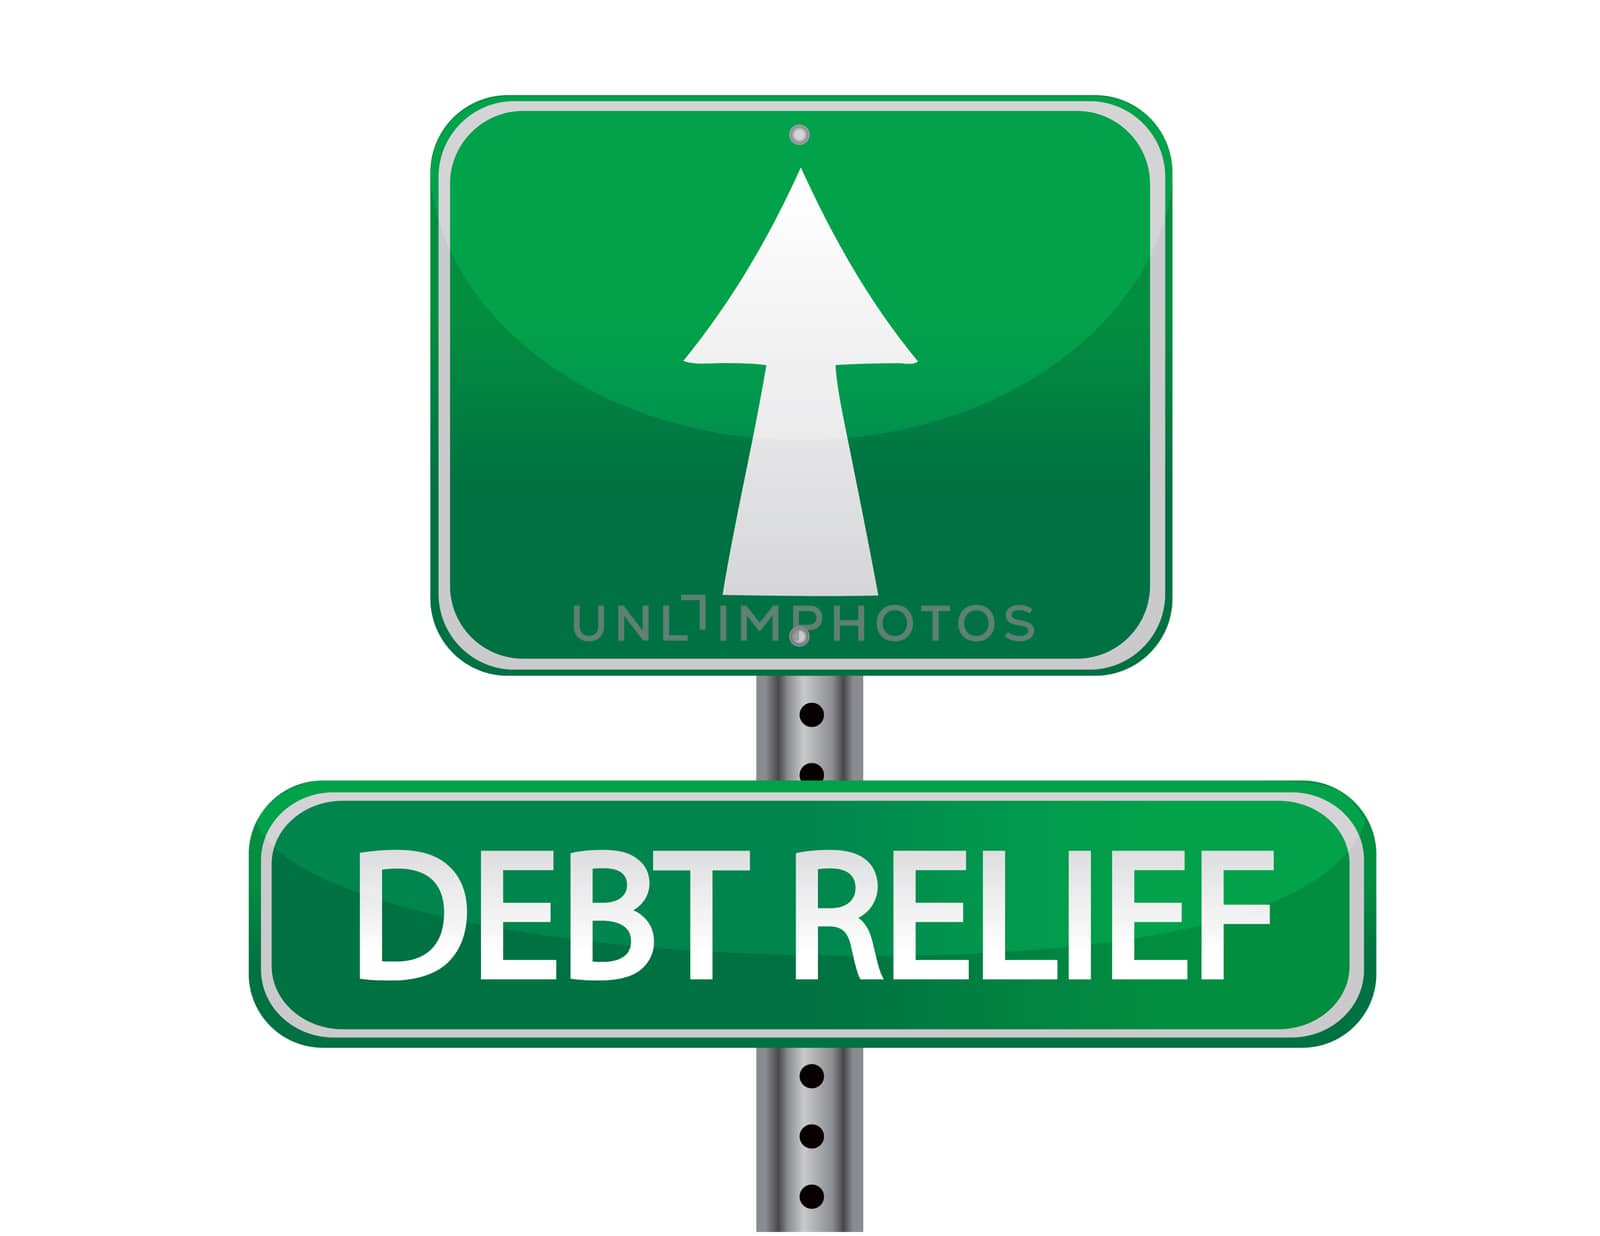 debt relief street sign concept isolated over a white background by alexmillos